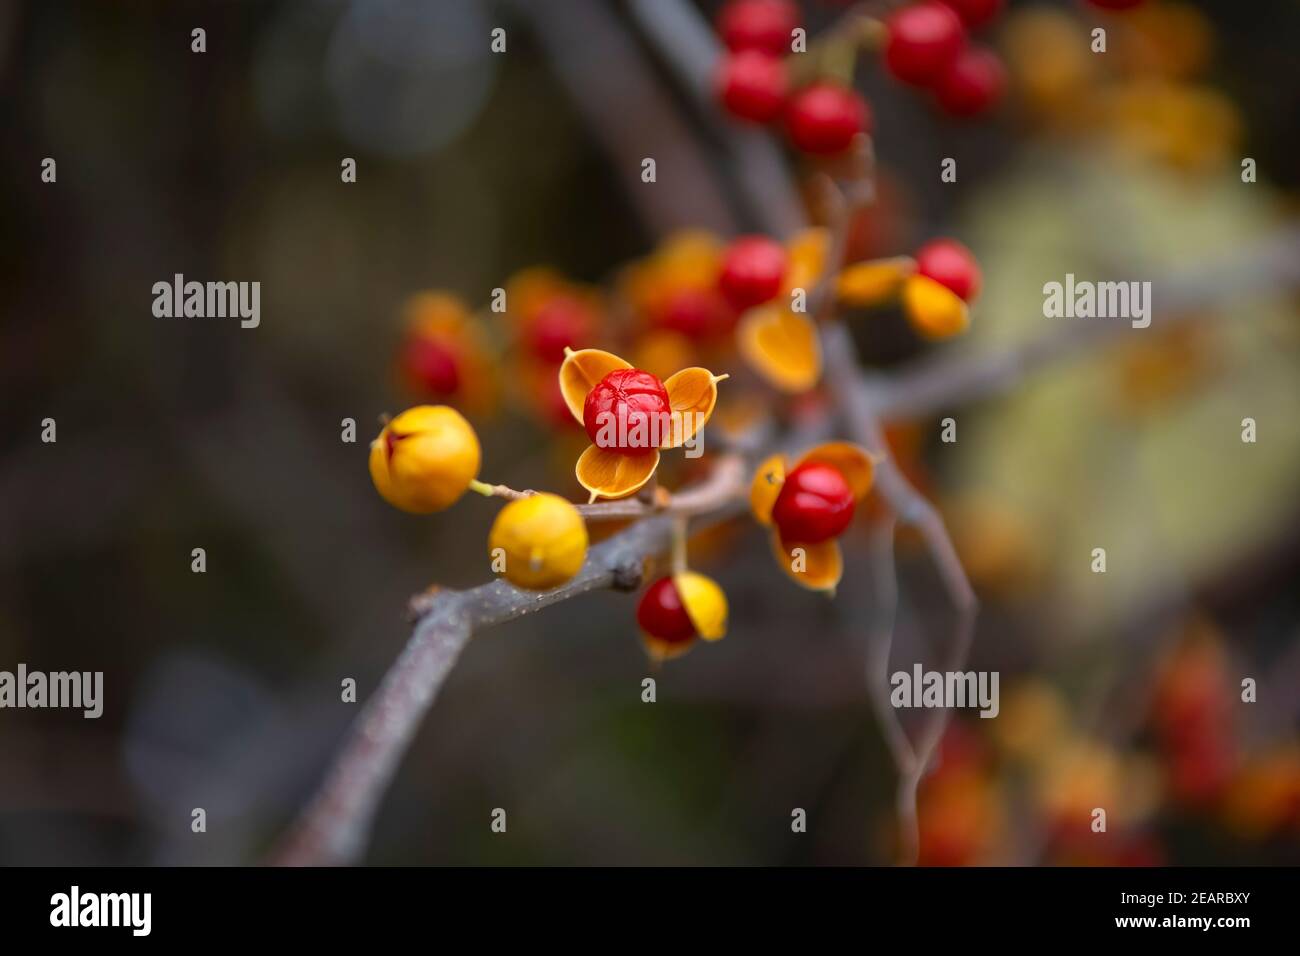 Plant branch with red berries in autumn Stock Photo